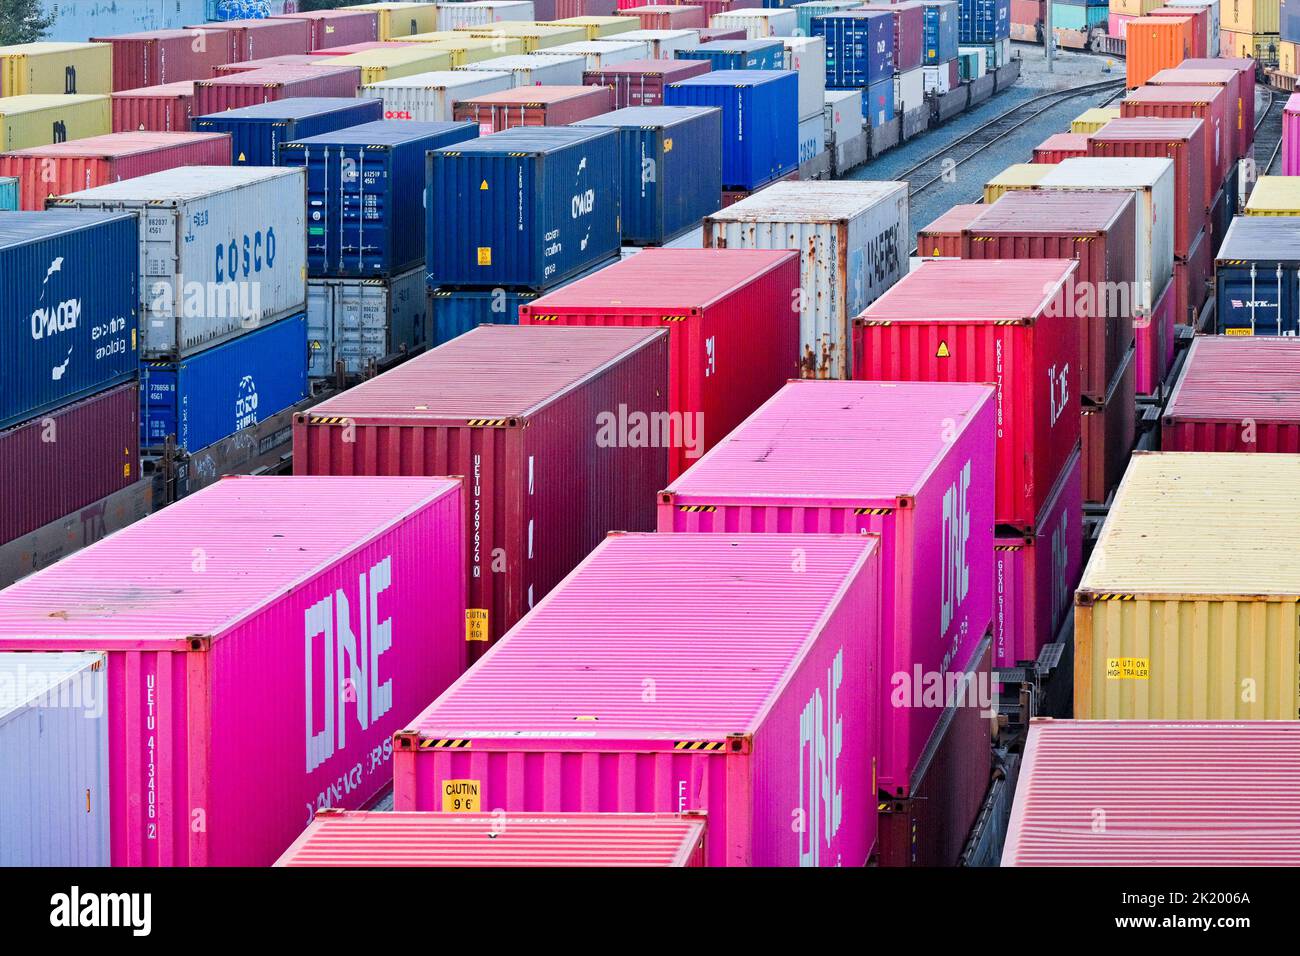 Shipping containers in railway freight yard, Vancouver, British Columbia, Canada Stock Photo